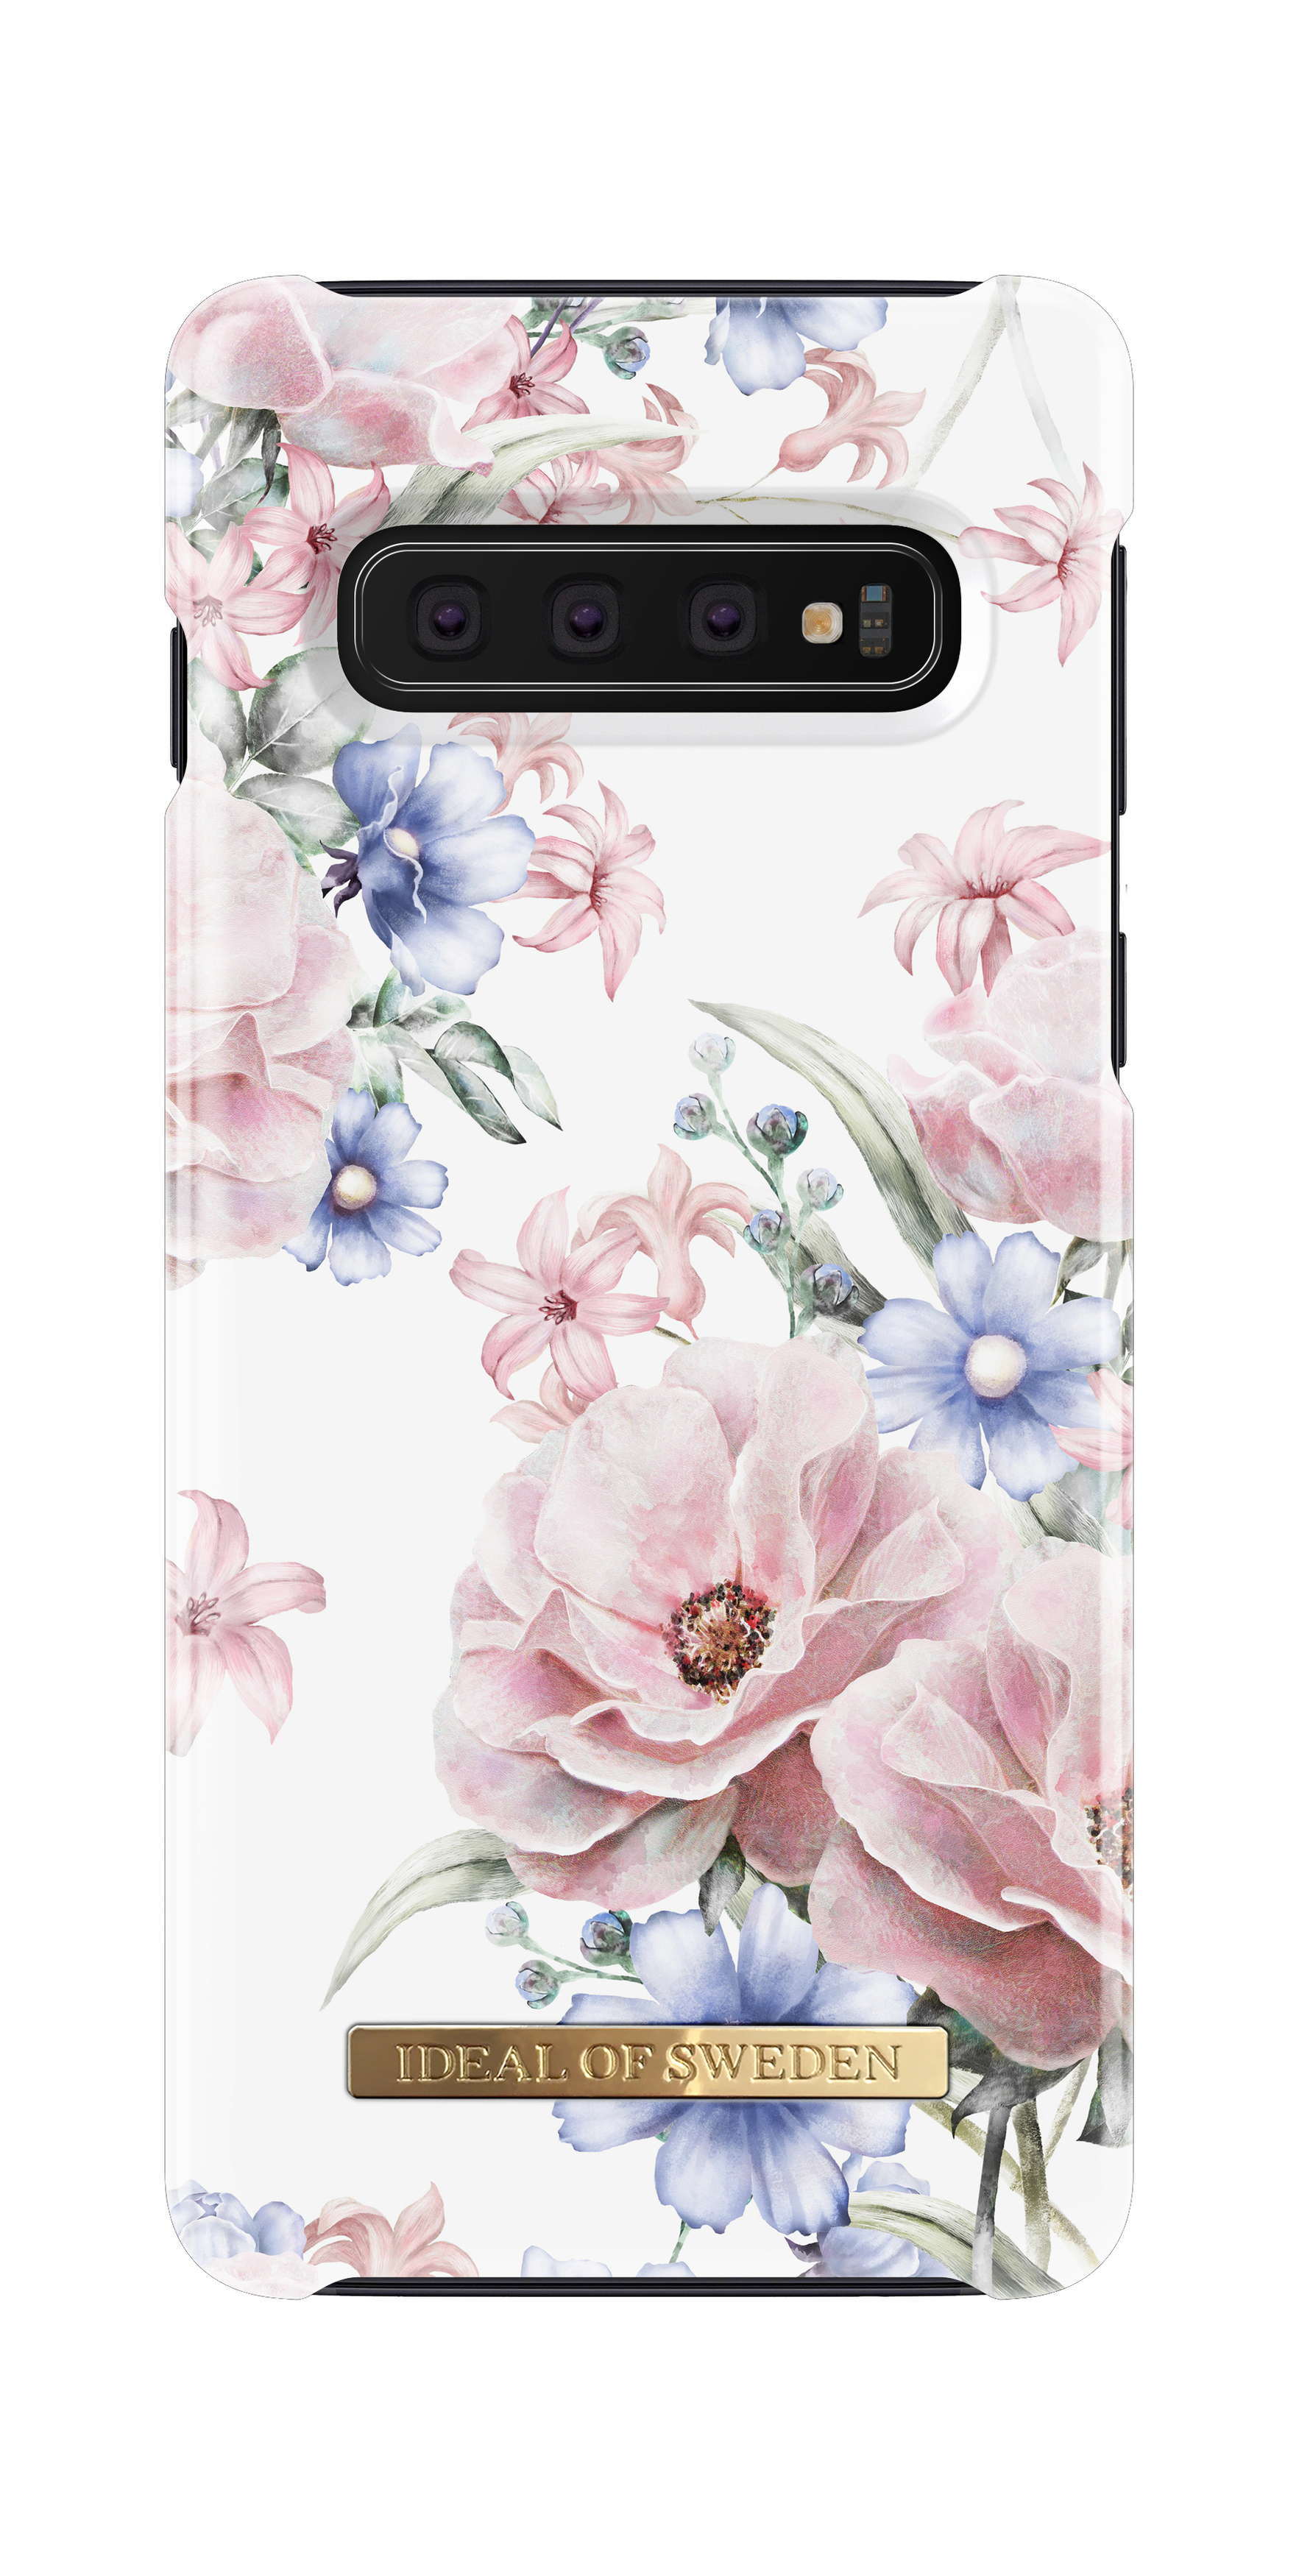 Backcover, Floral Romance SWEDEN Samsung, S10, Galaxy OF IDEAL Fashion,